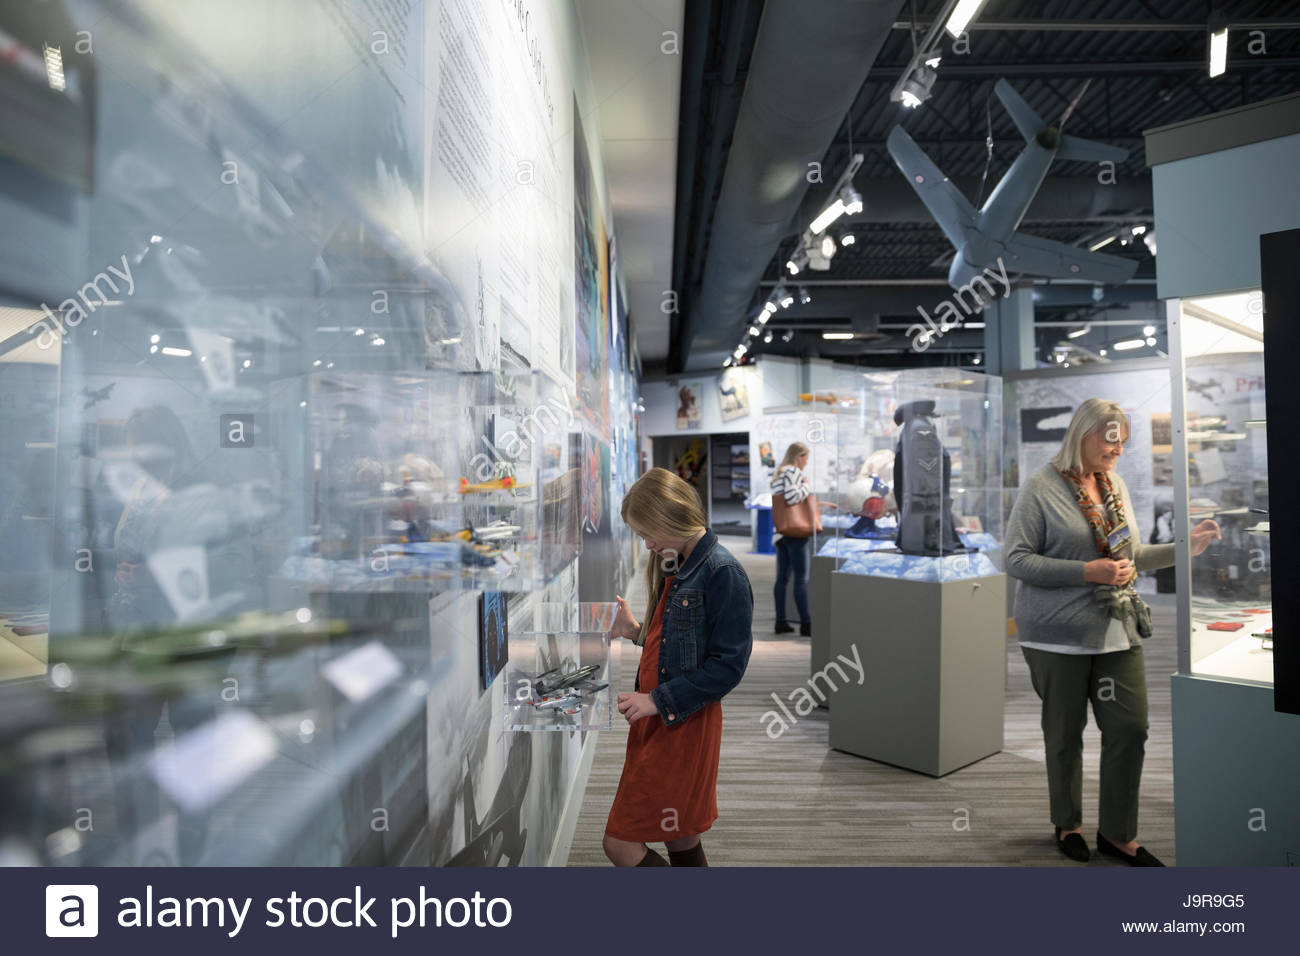 People looking at exhibits in war museum Stock Photo